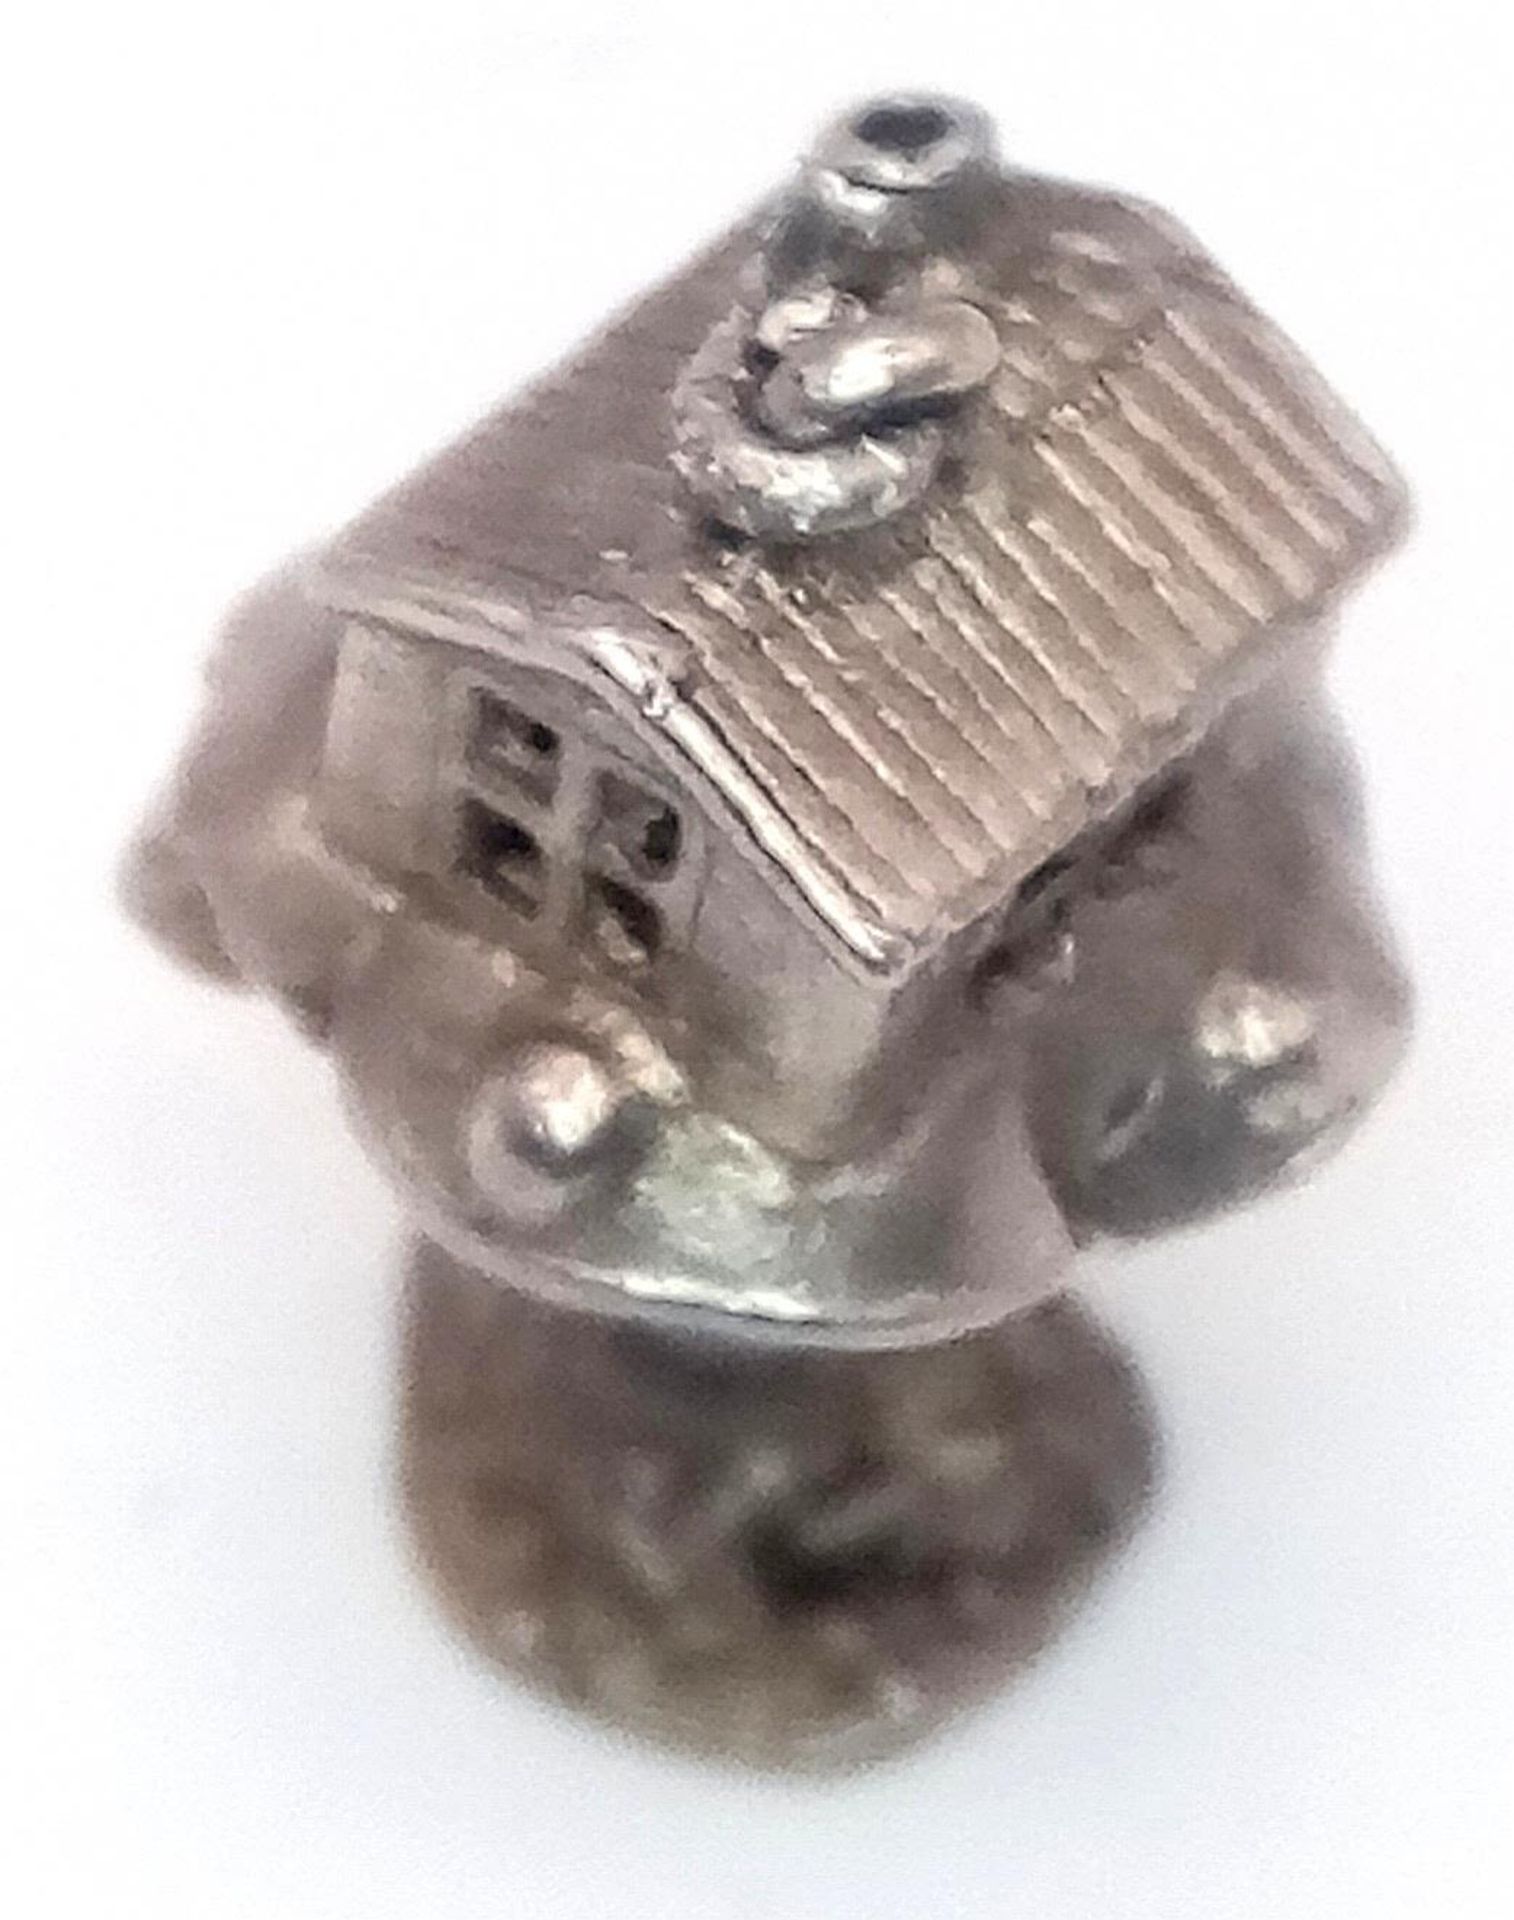 A VINTAGE STERLING SILVER TREE HOUSE CHARM, WHICH OPENS TO REVEAL A WIZARD INSIDE, WEIGHT 4G - Image 8 of 8